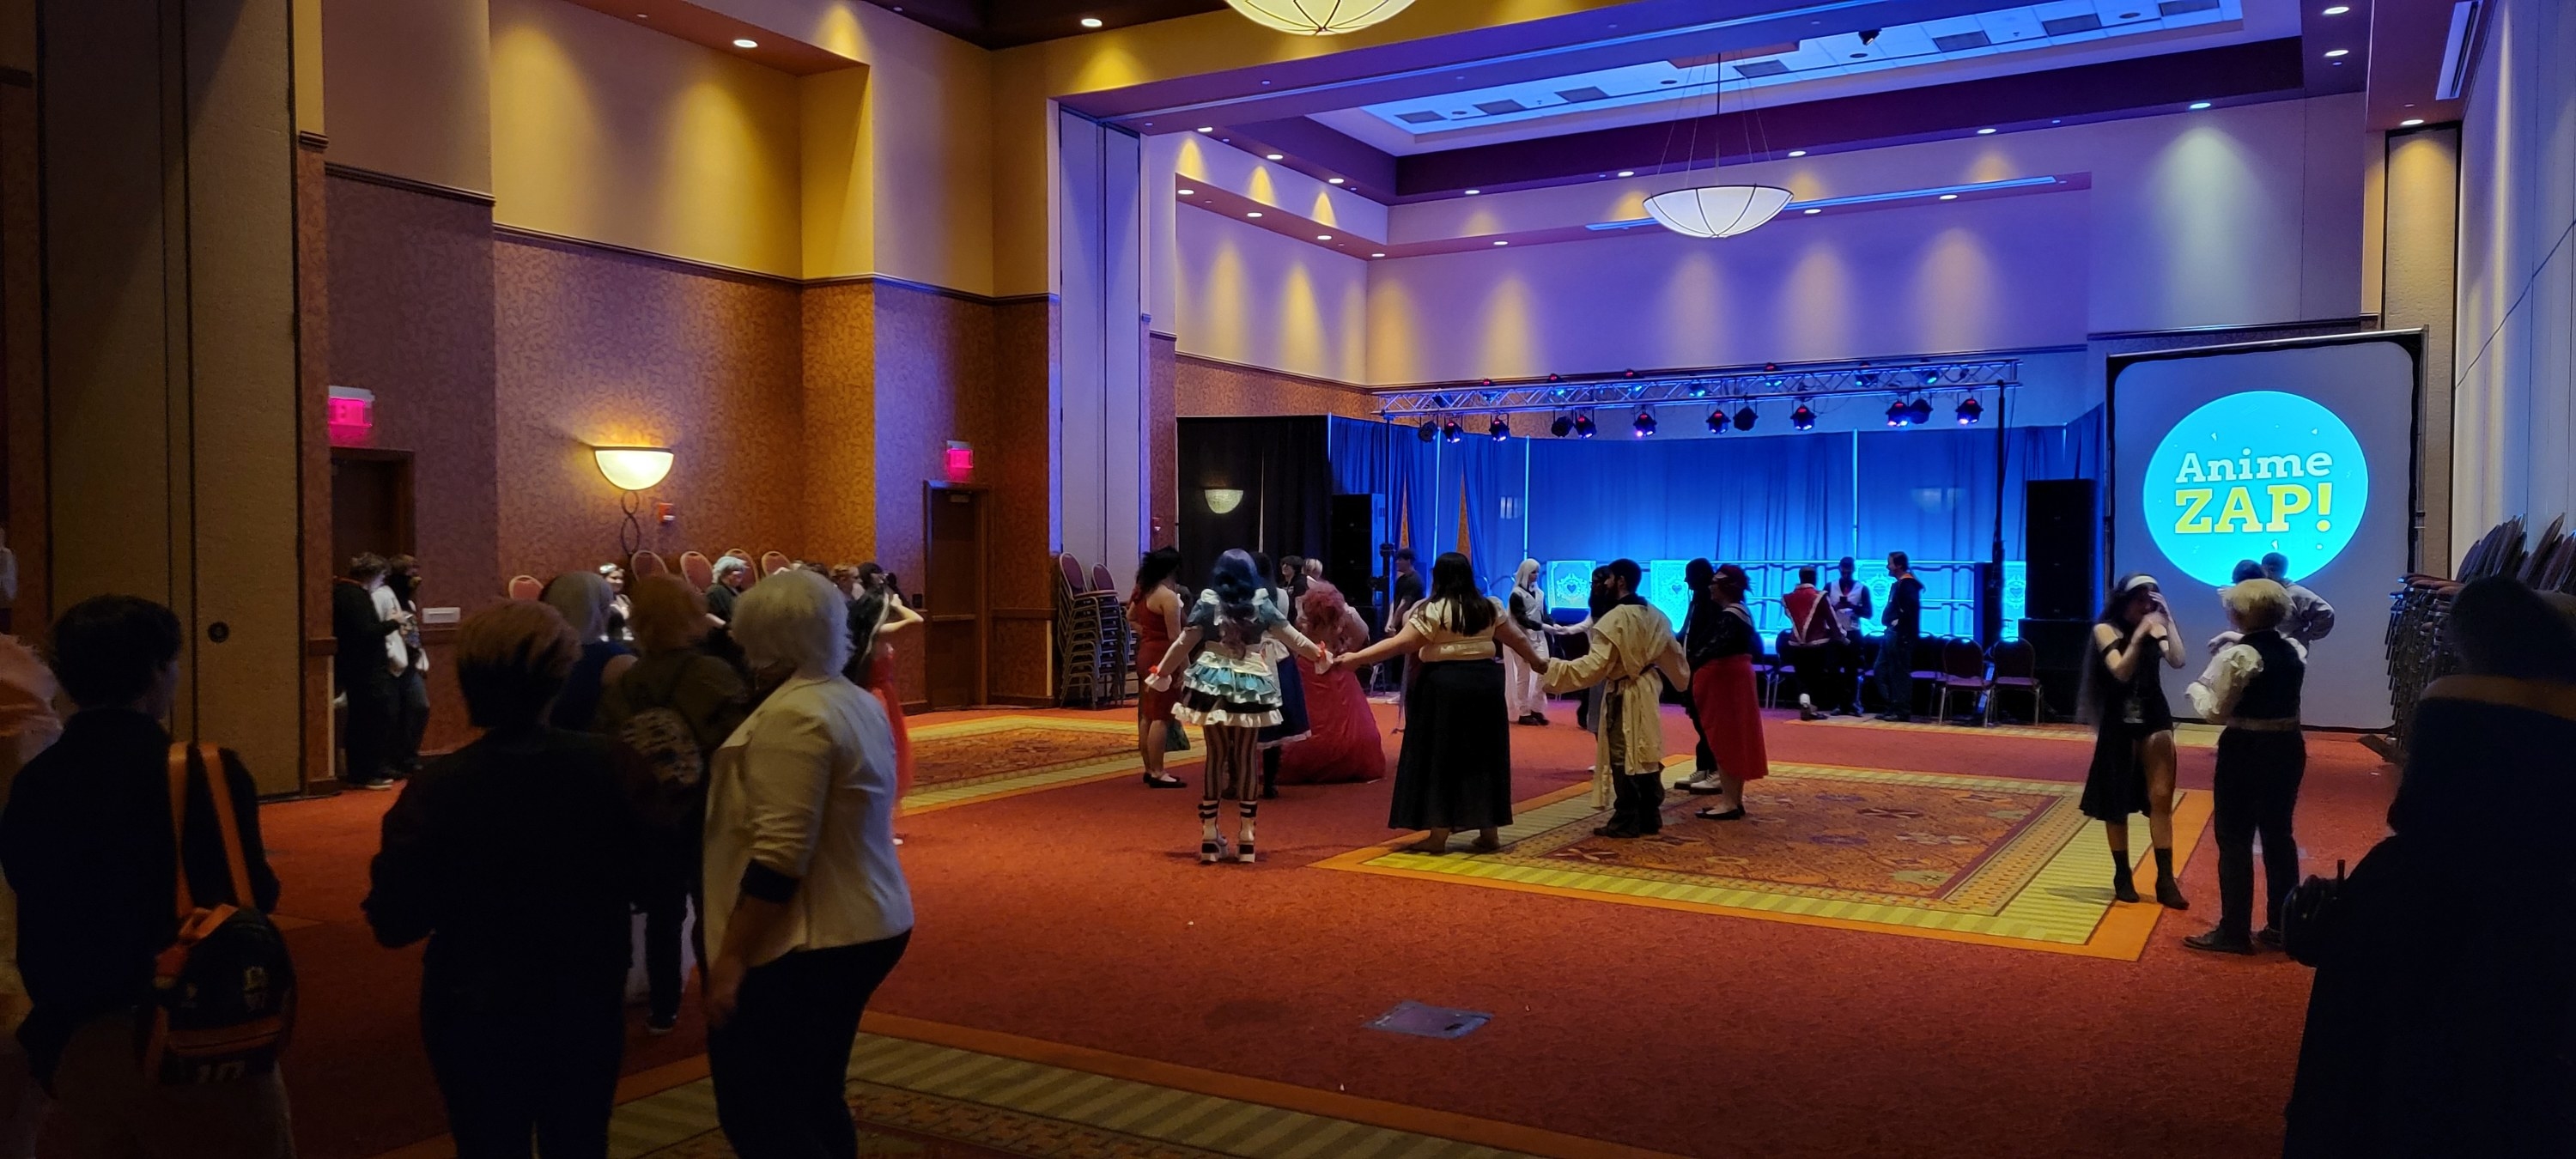 Photo of Anime ZAP showing people in cosplay dancing.